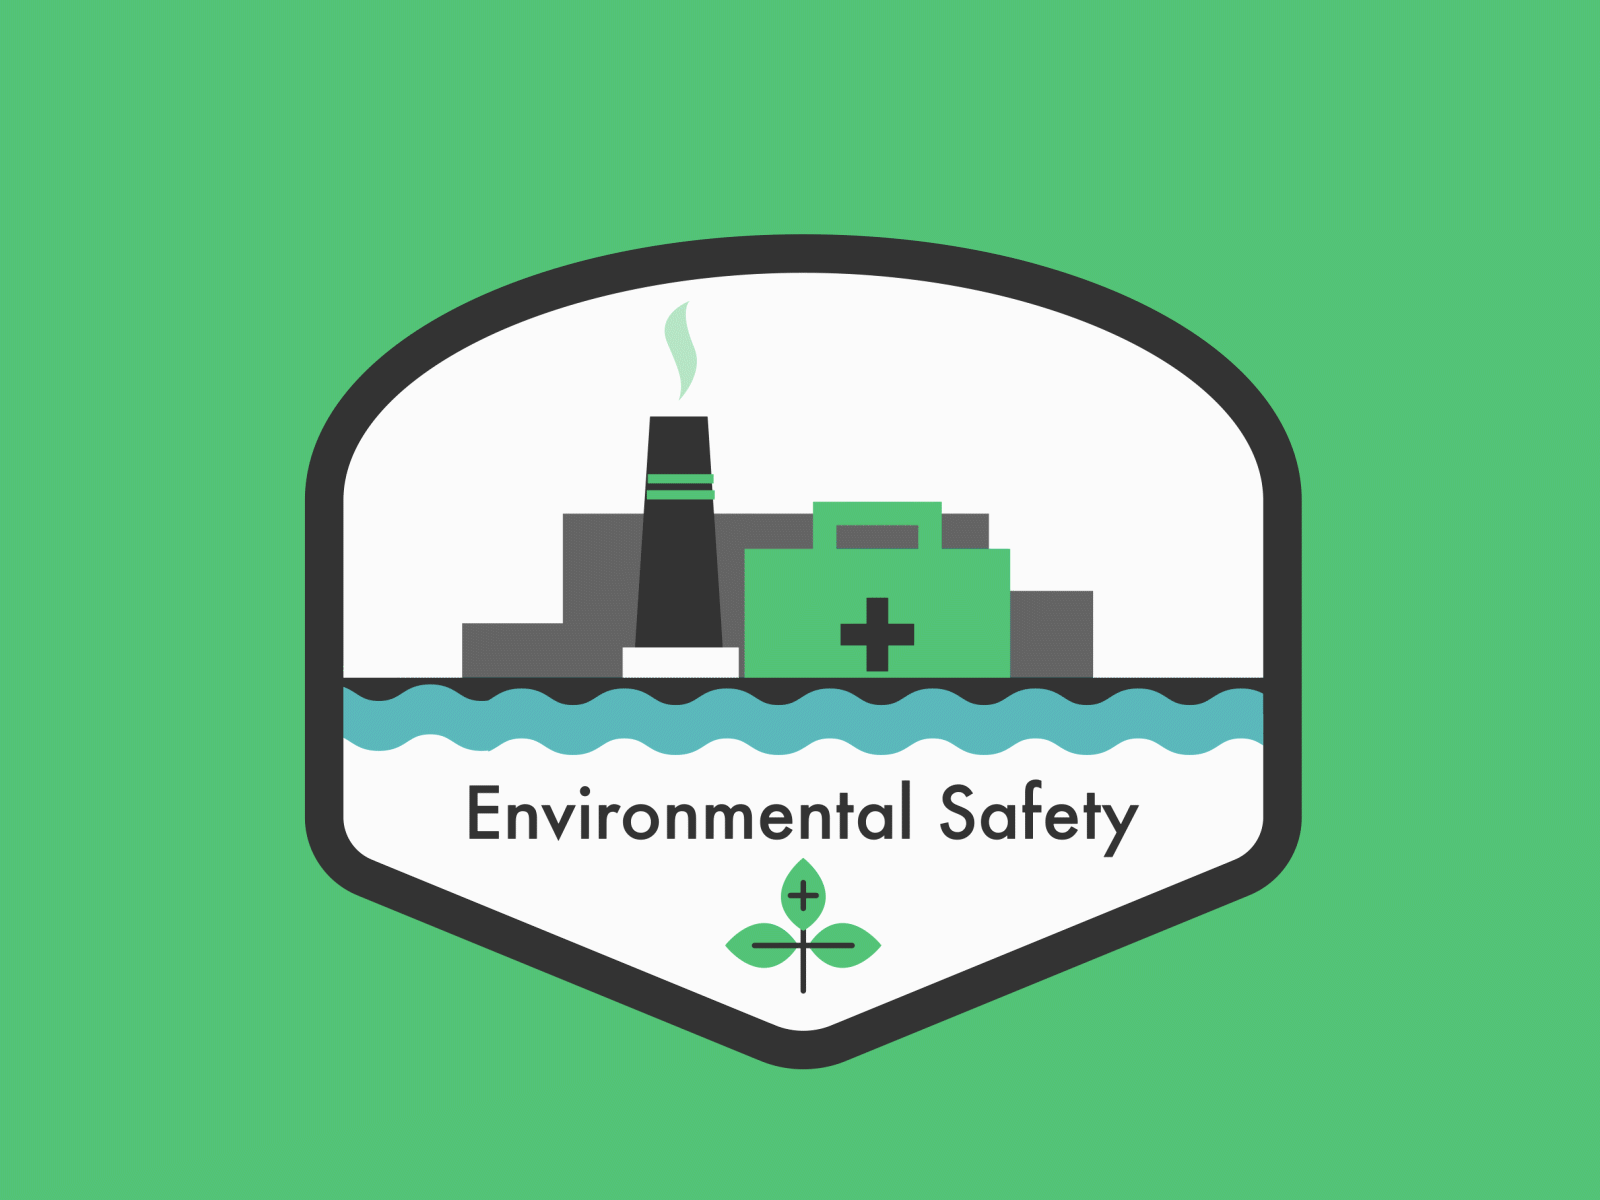 Environmental Safety logo after effects elearning environment environmental environmental health and safety factory gif health illustration logo manufacturing motion graphic safety training